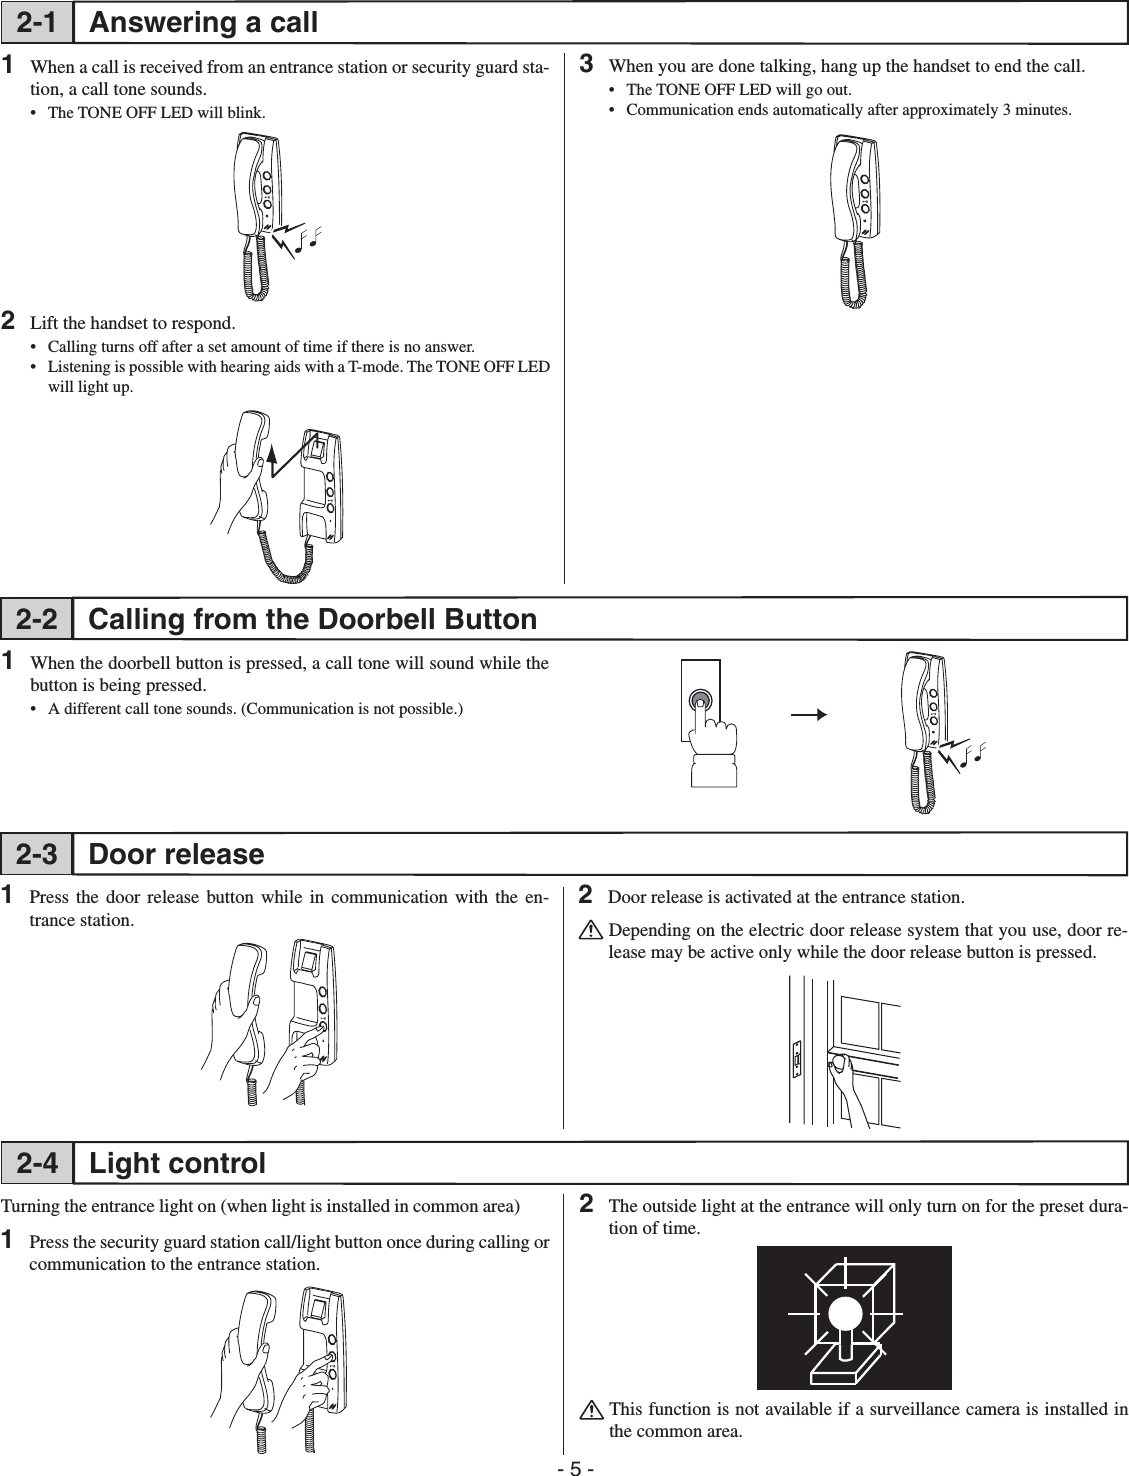 Page 5 of 8 - Aiphone GT1D取説-EN GT-1D Apartment Intercom System Residential Station GT-1DOperation Manual